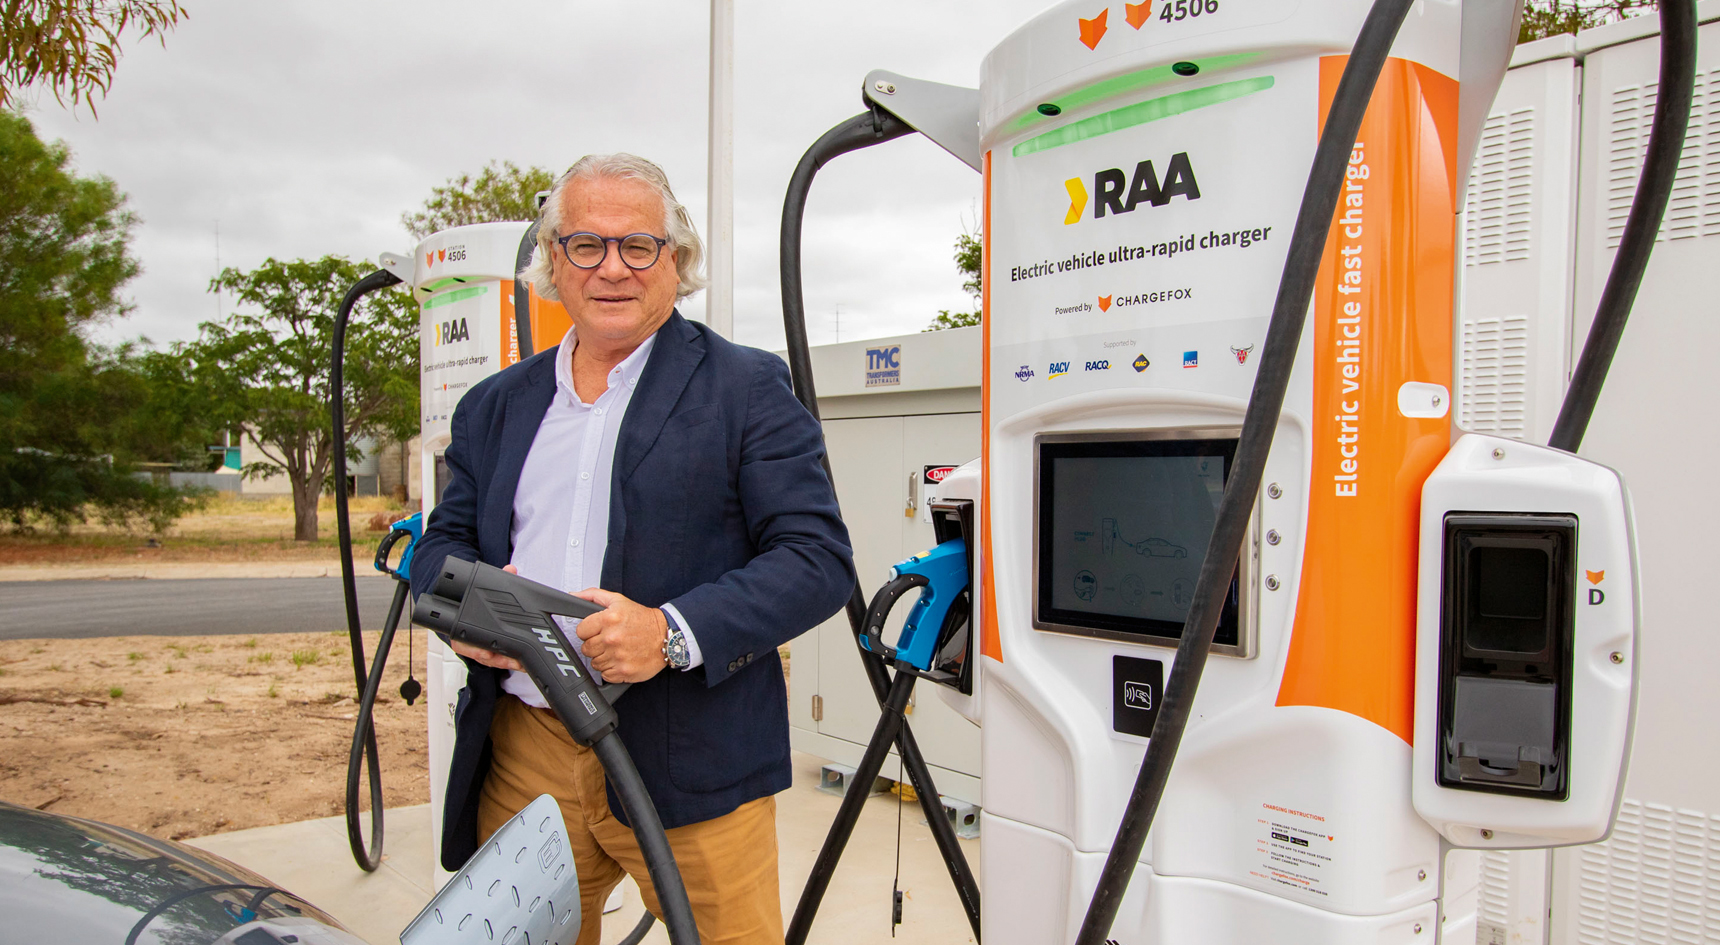 RAA's Mark Borlace holding a charger at the Chargefox station in Keith.